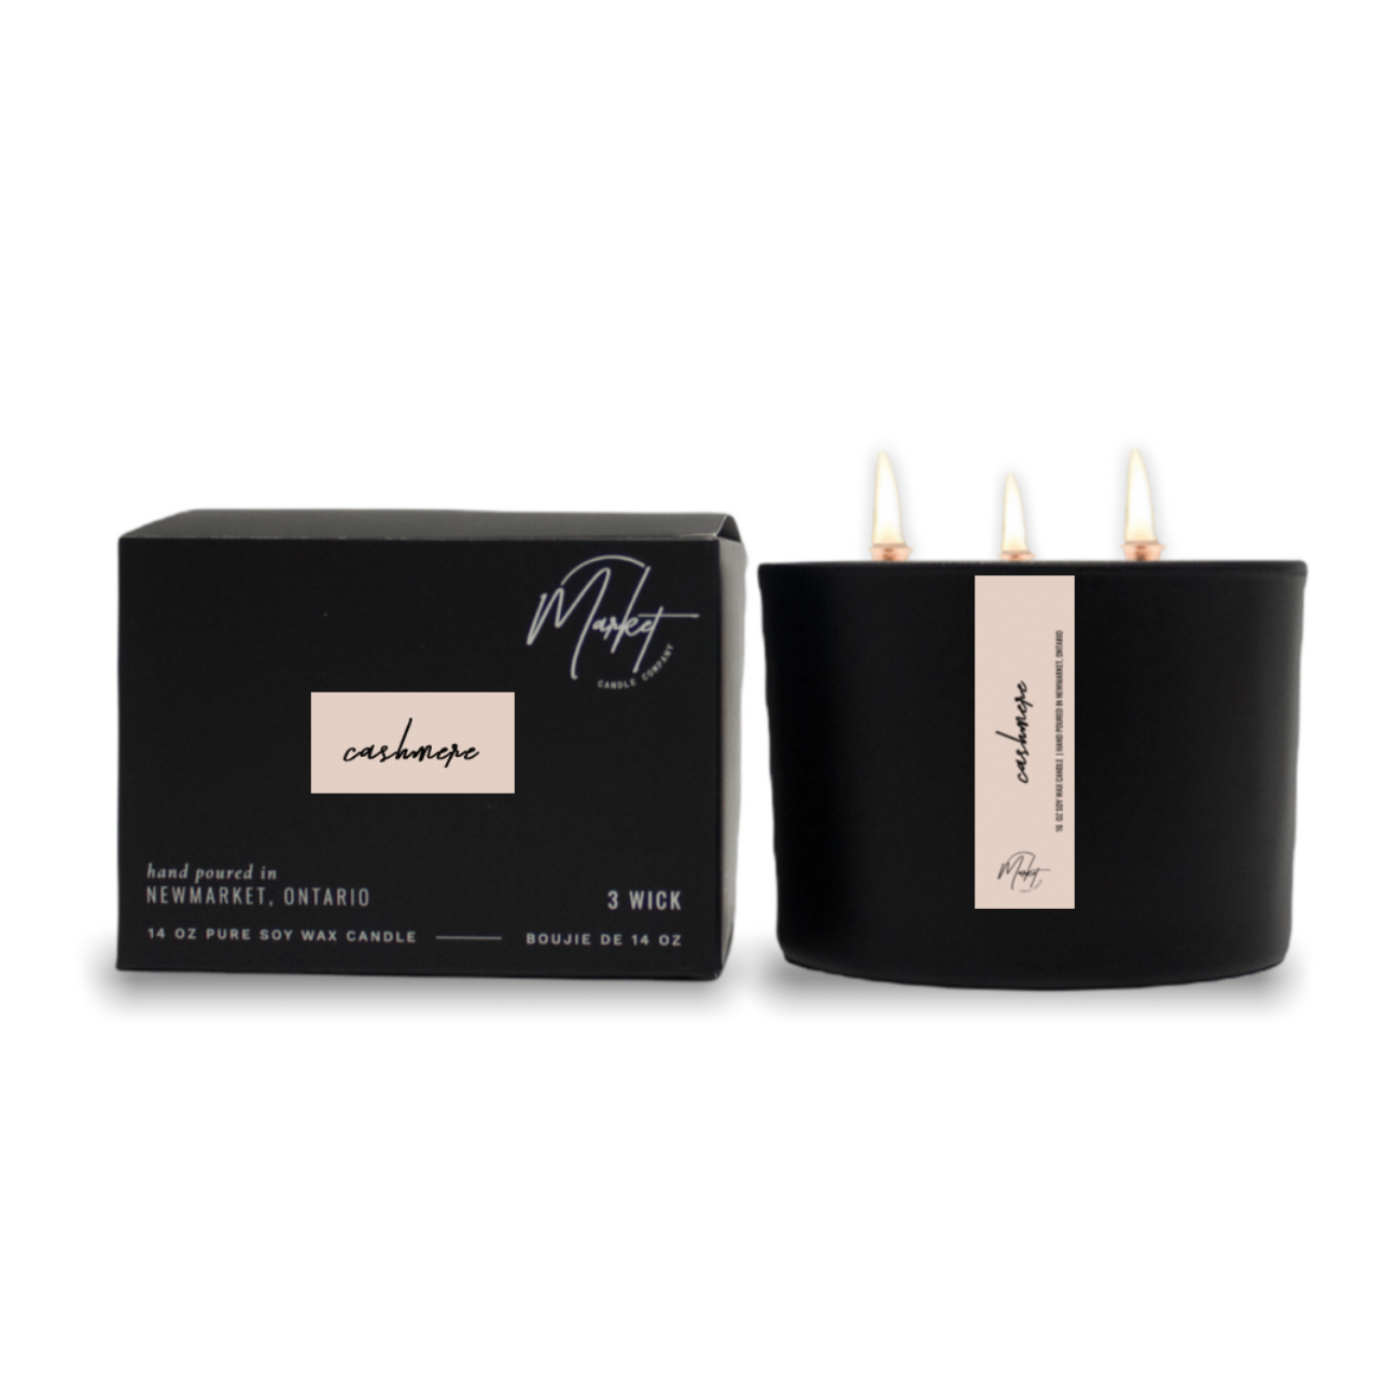 CANDLE (SOY WAX), CASHMERE 14 oz